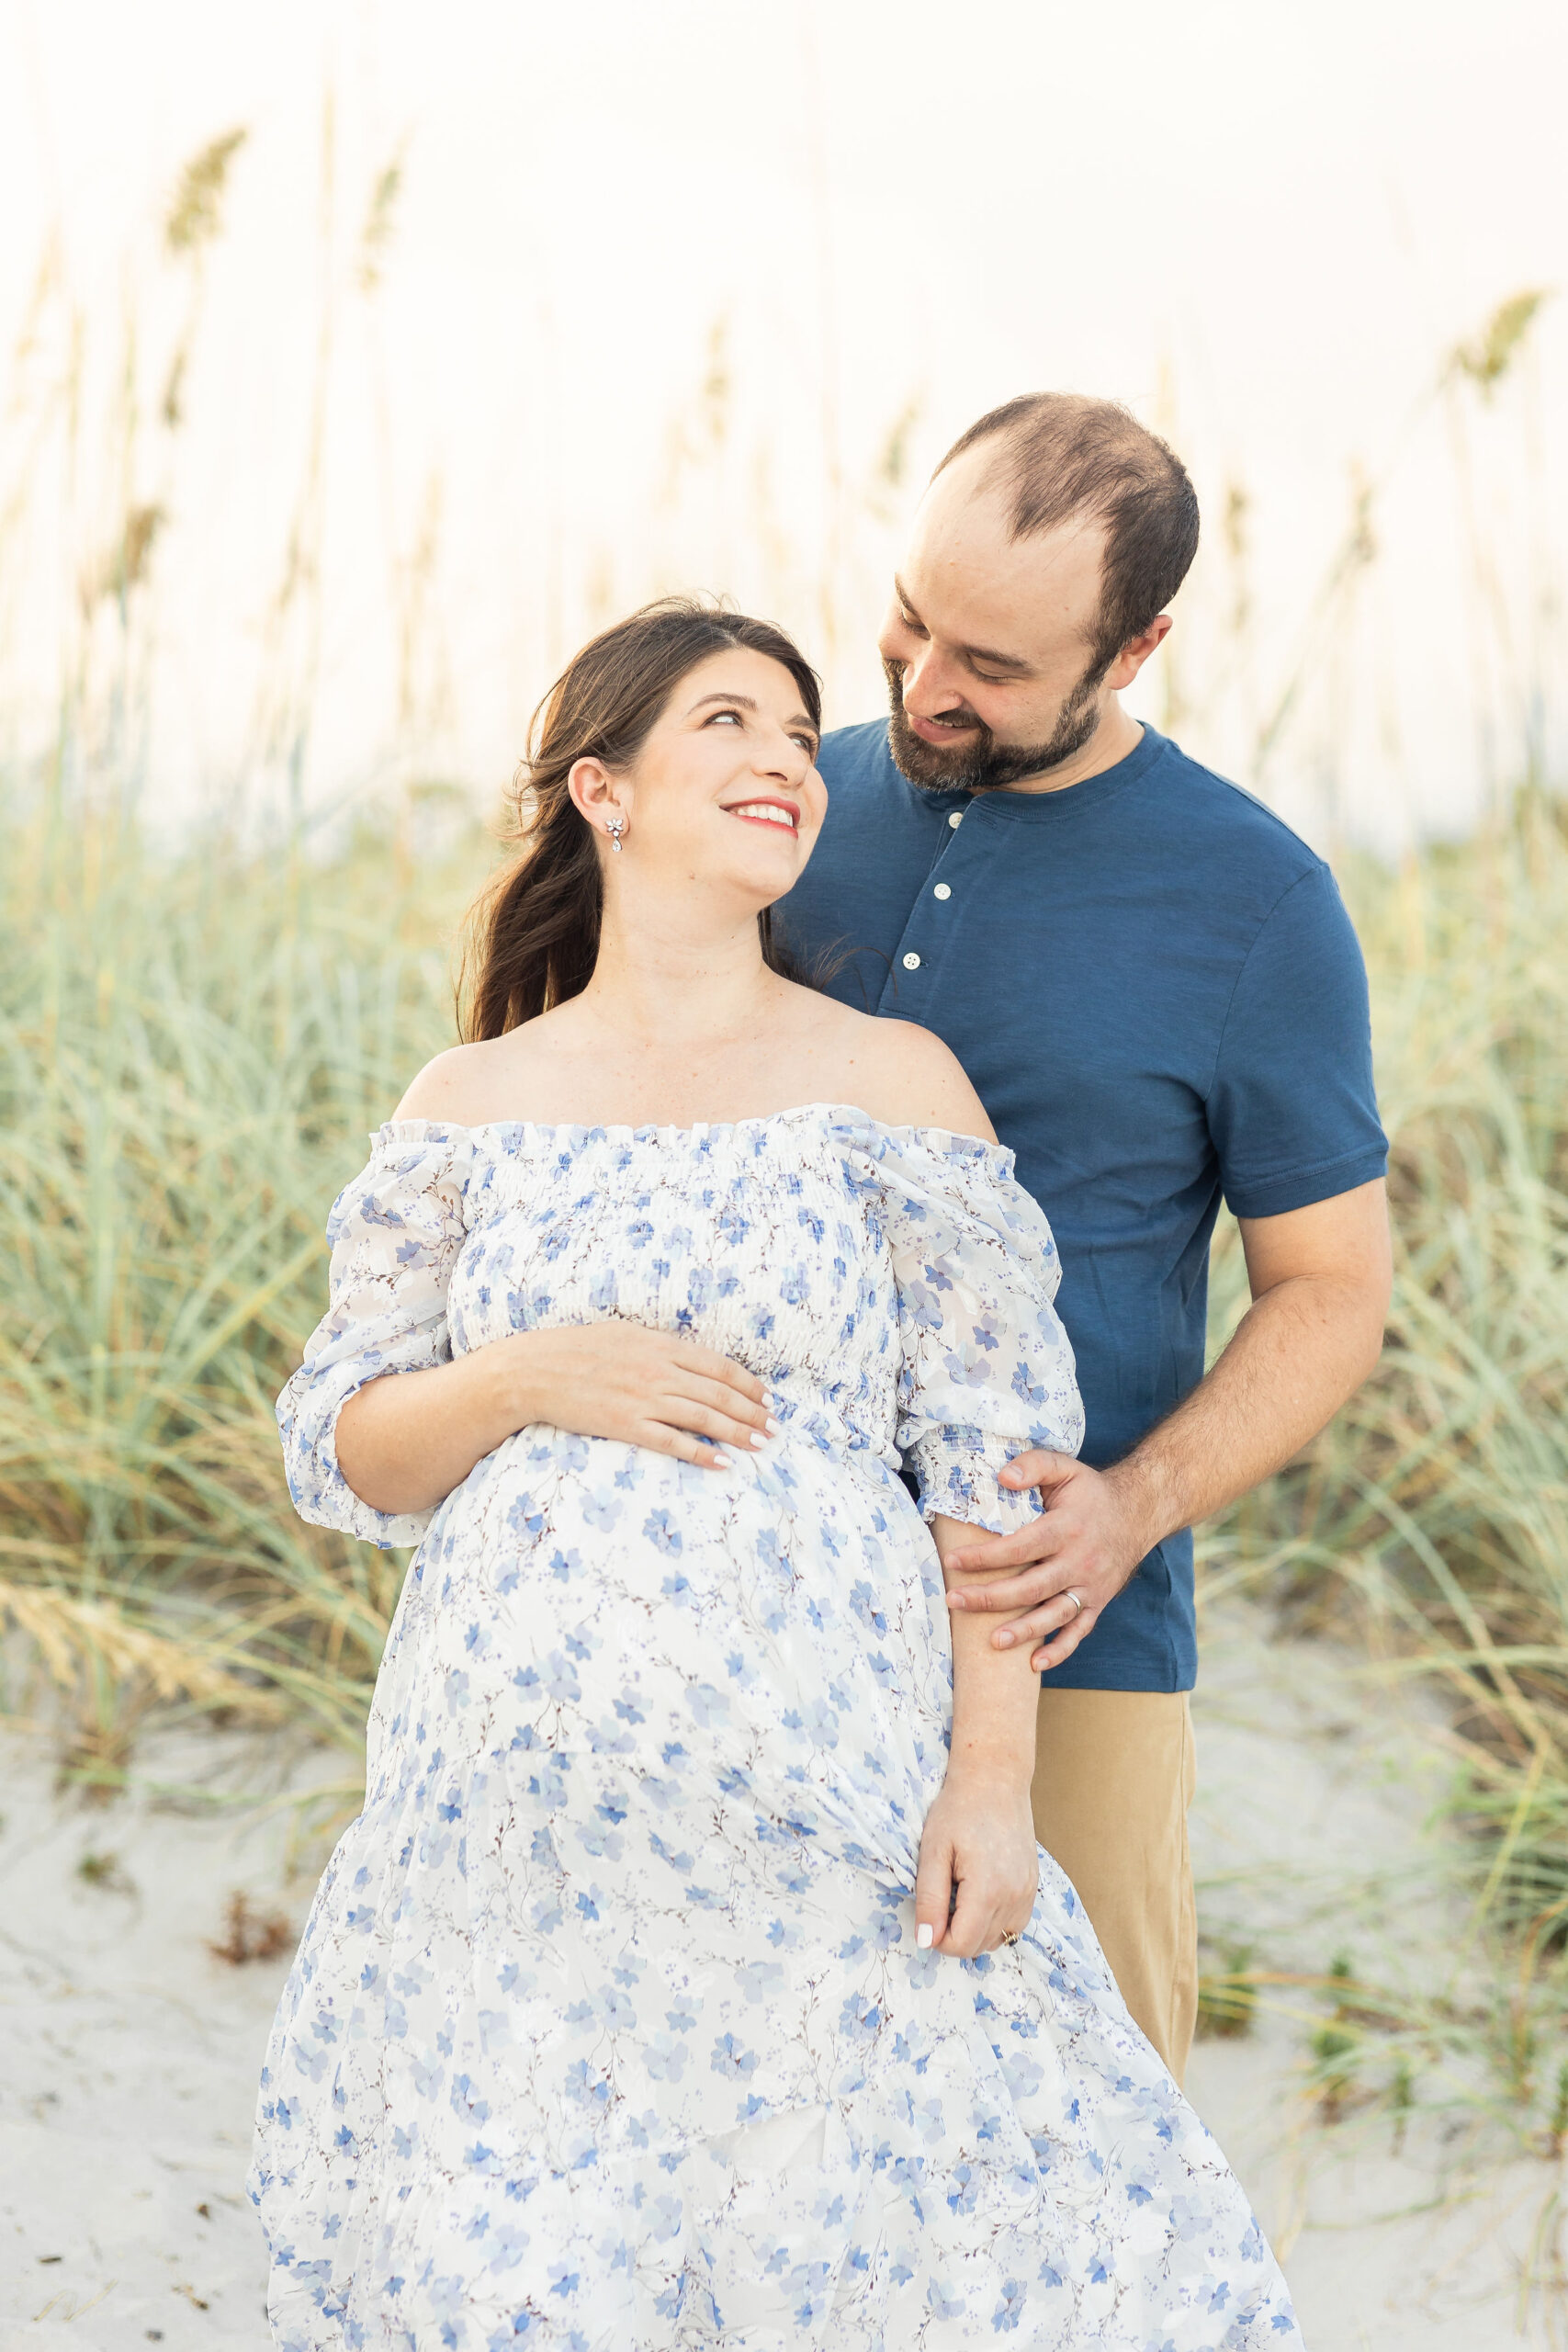 Expecting parents stand on a beach at sunset smiling at each other and holding the bump after meeting amazing births and beyond